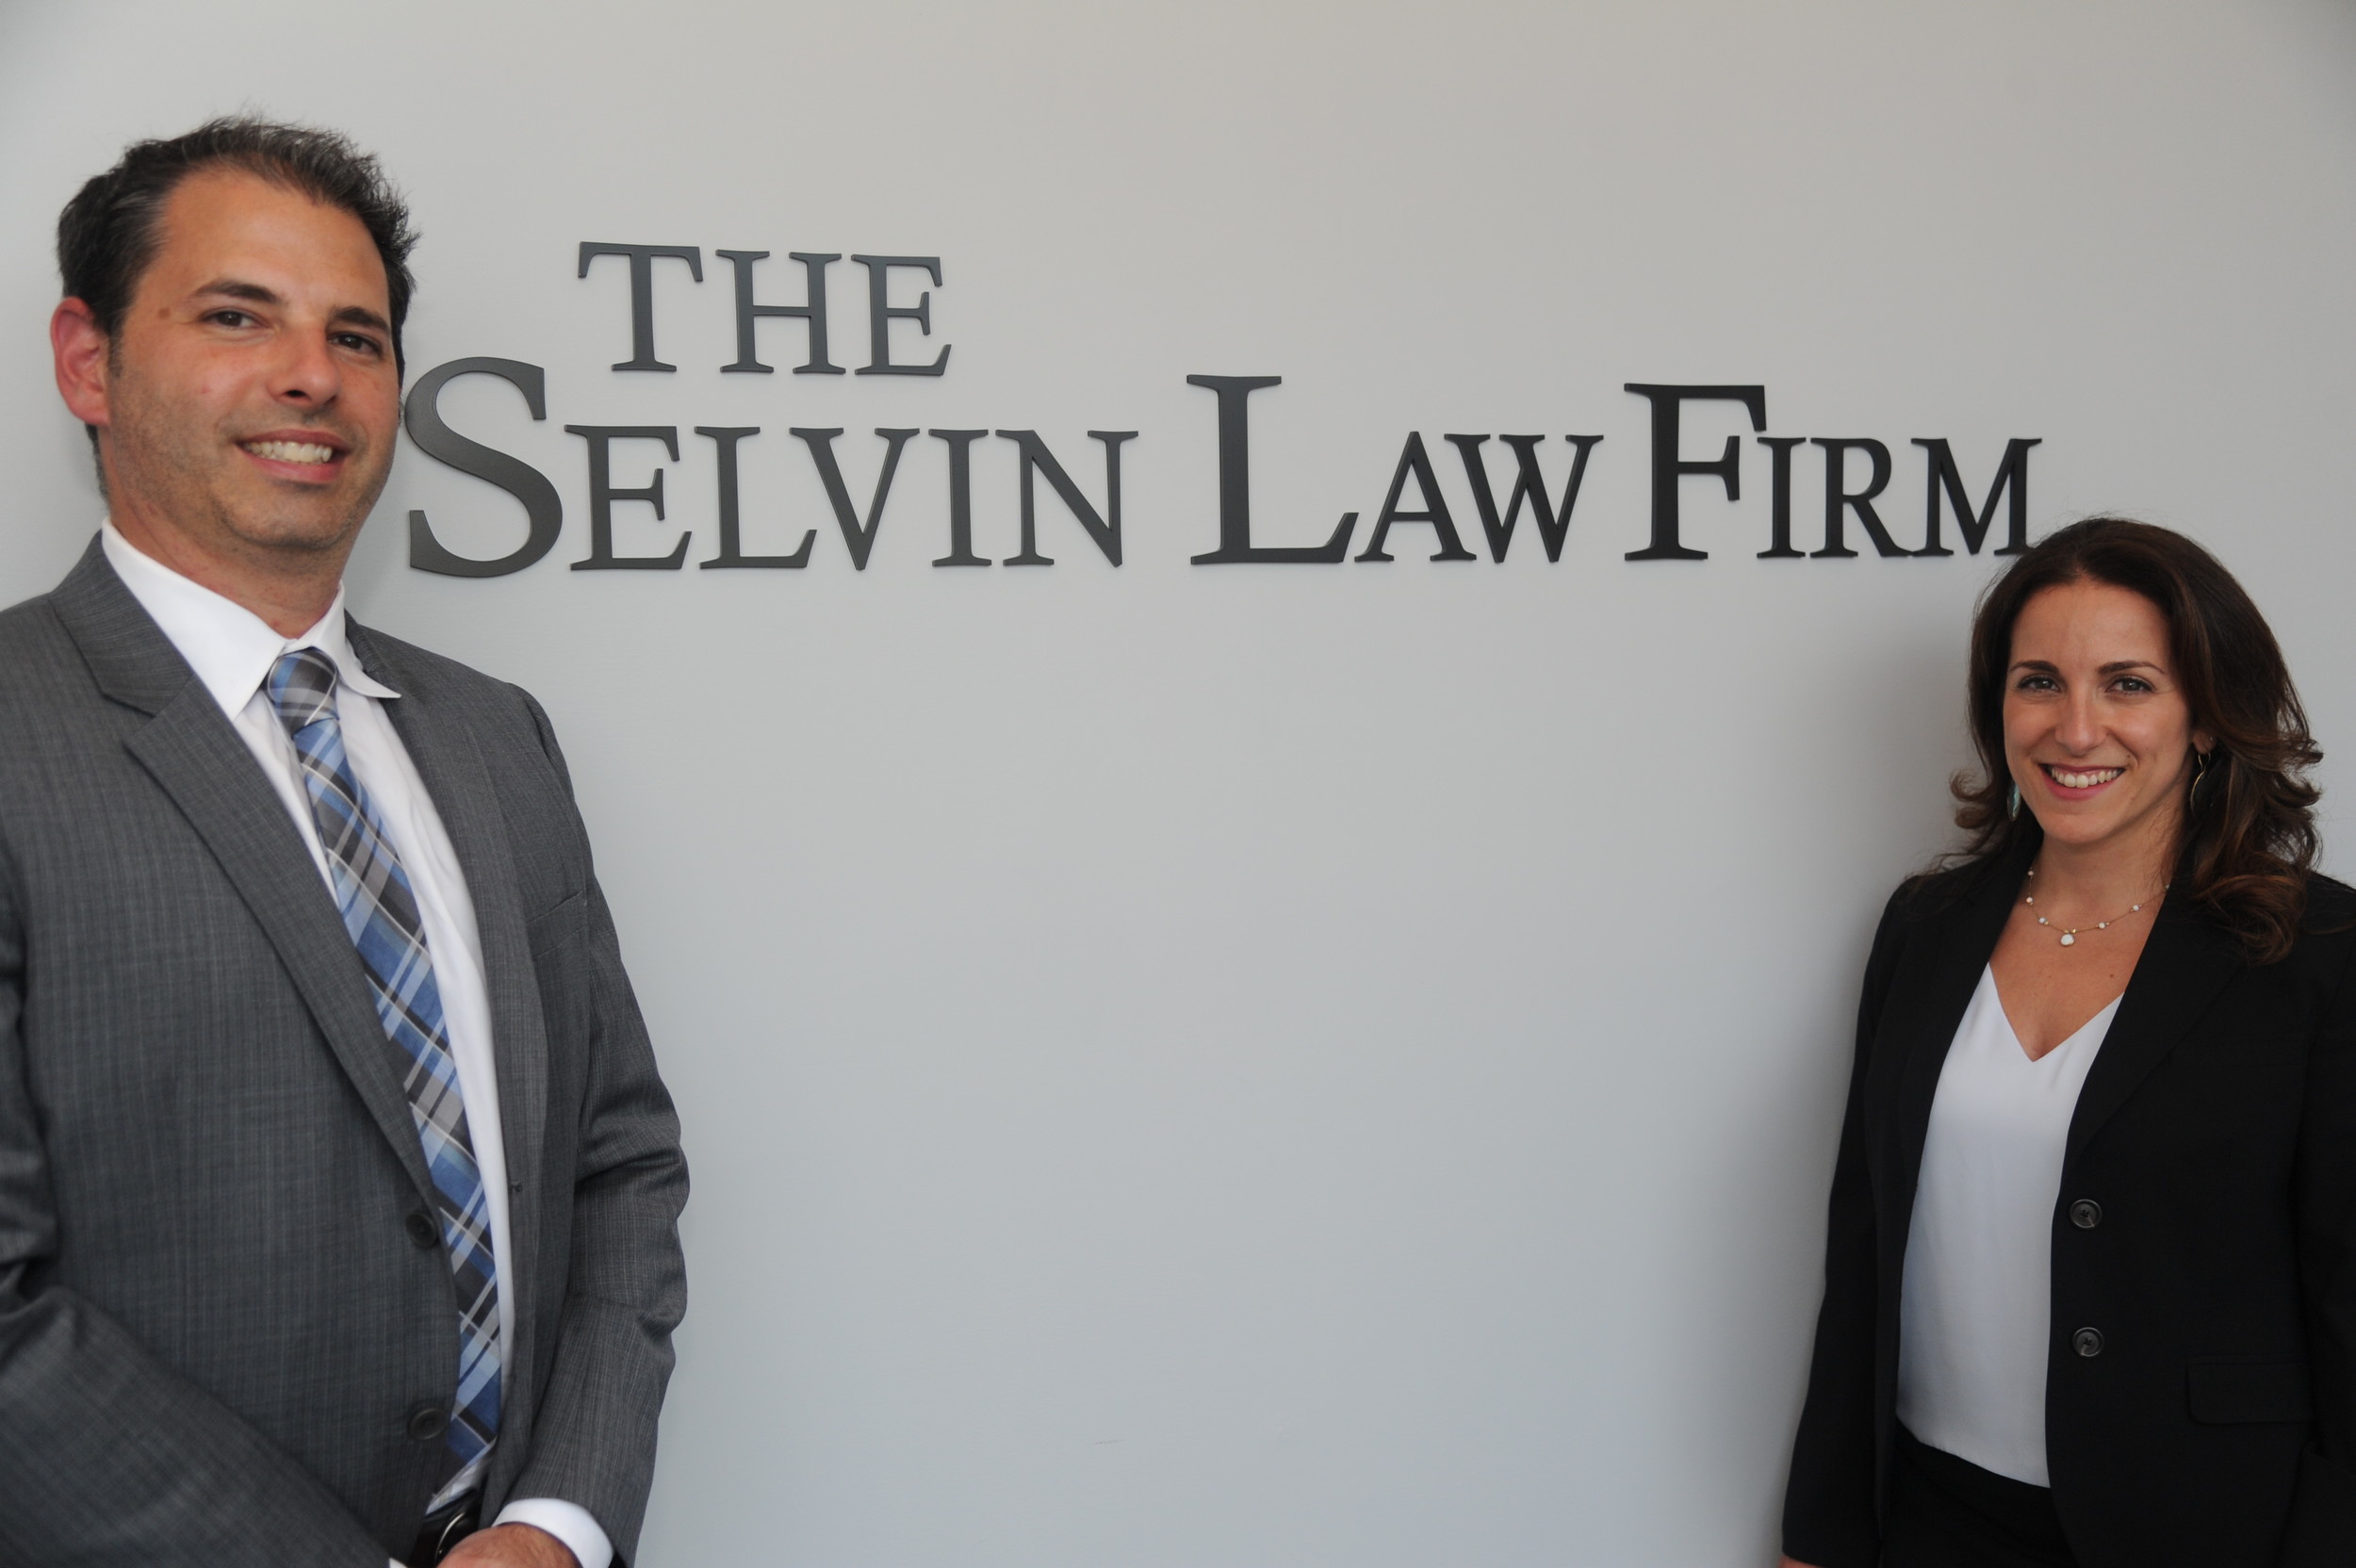 Owners Jared M. Selvin and Sabrina E. Taub officially opened the Selvin Law Firm last Thursday.